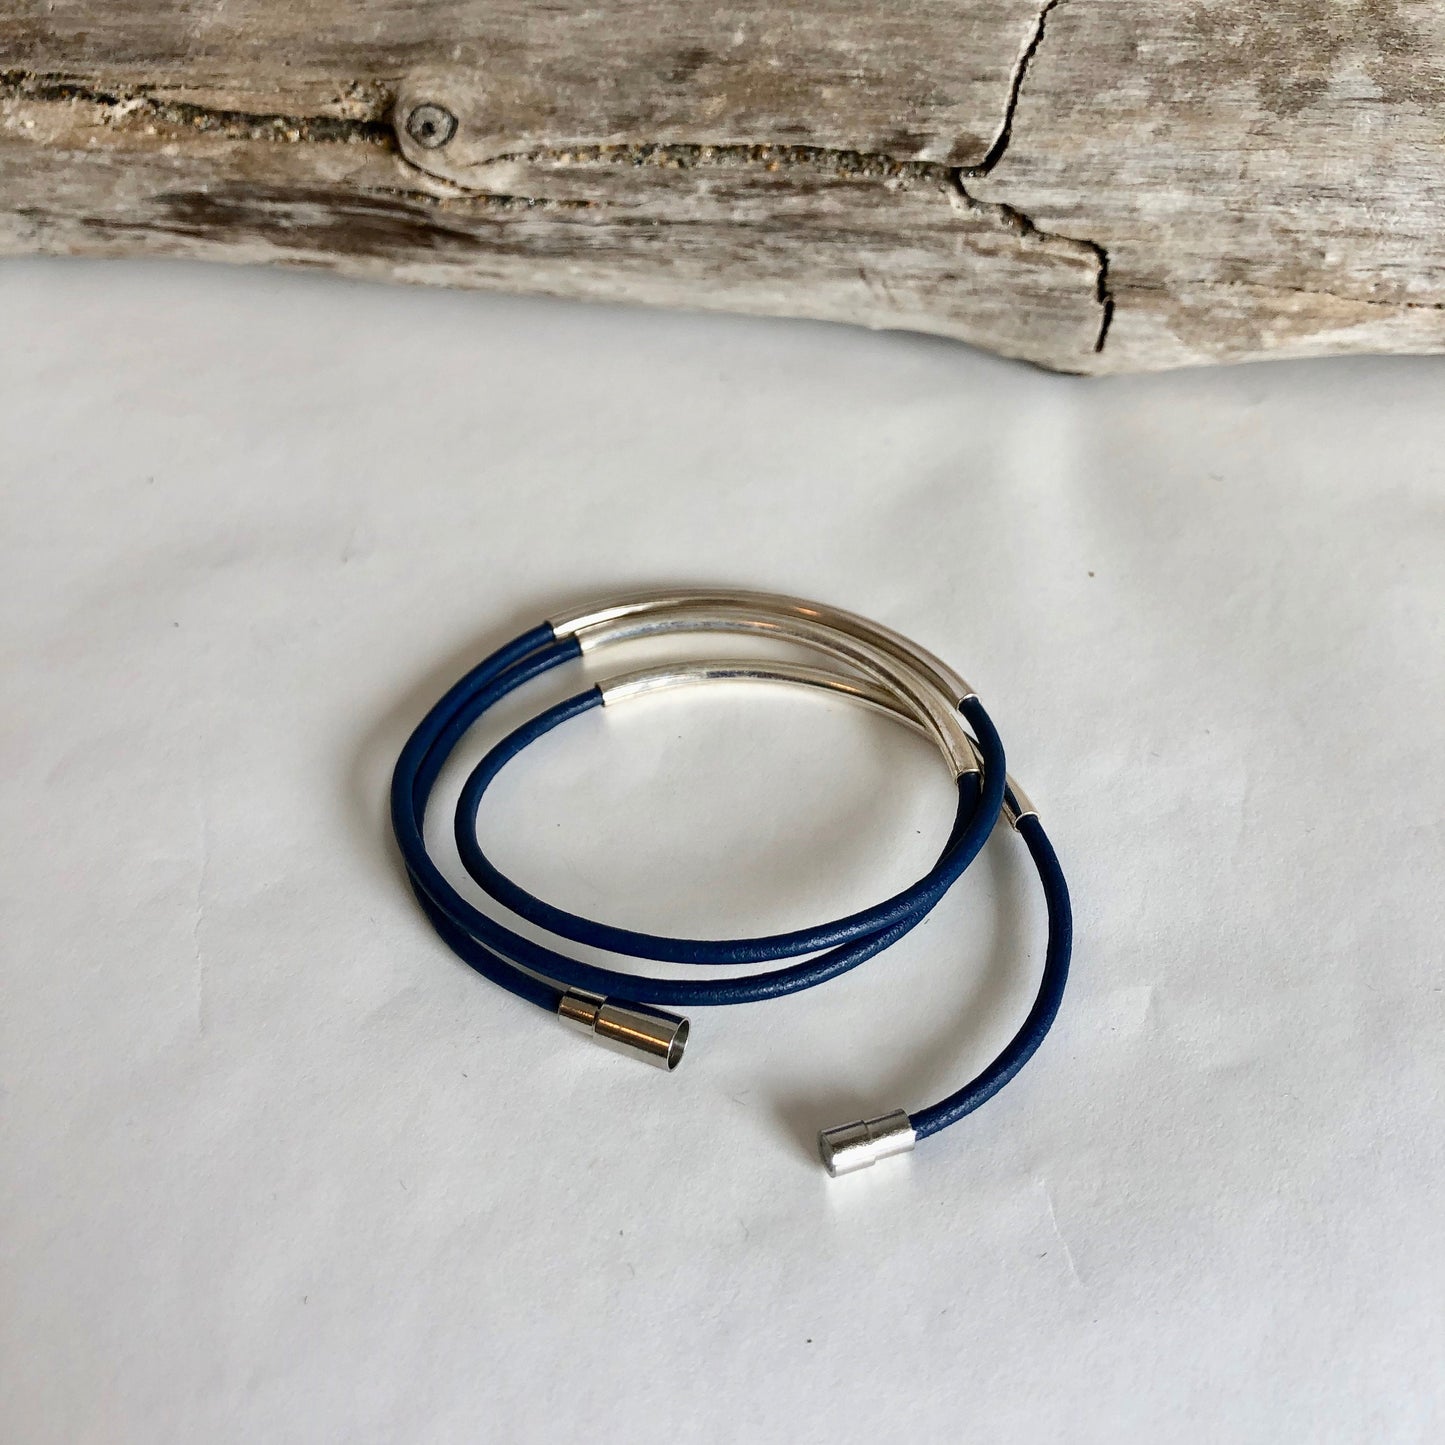 Leather bracelet, made of fine deep blue Italian leather, silver tubes, and finished with a quality silver magnetic clasp.